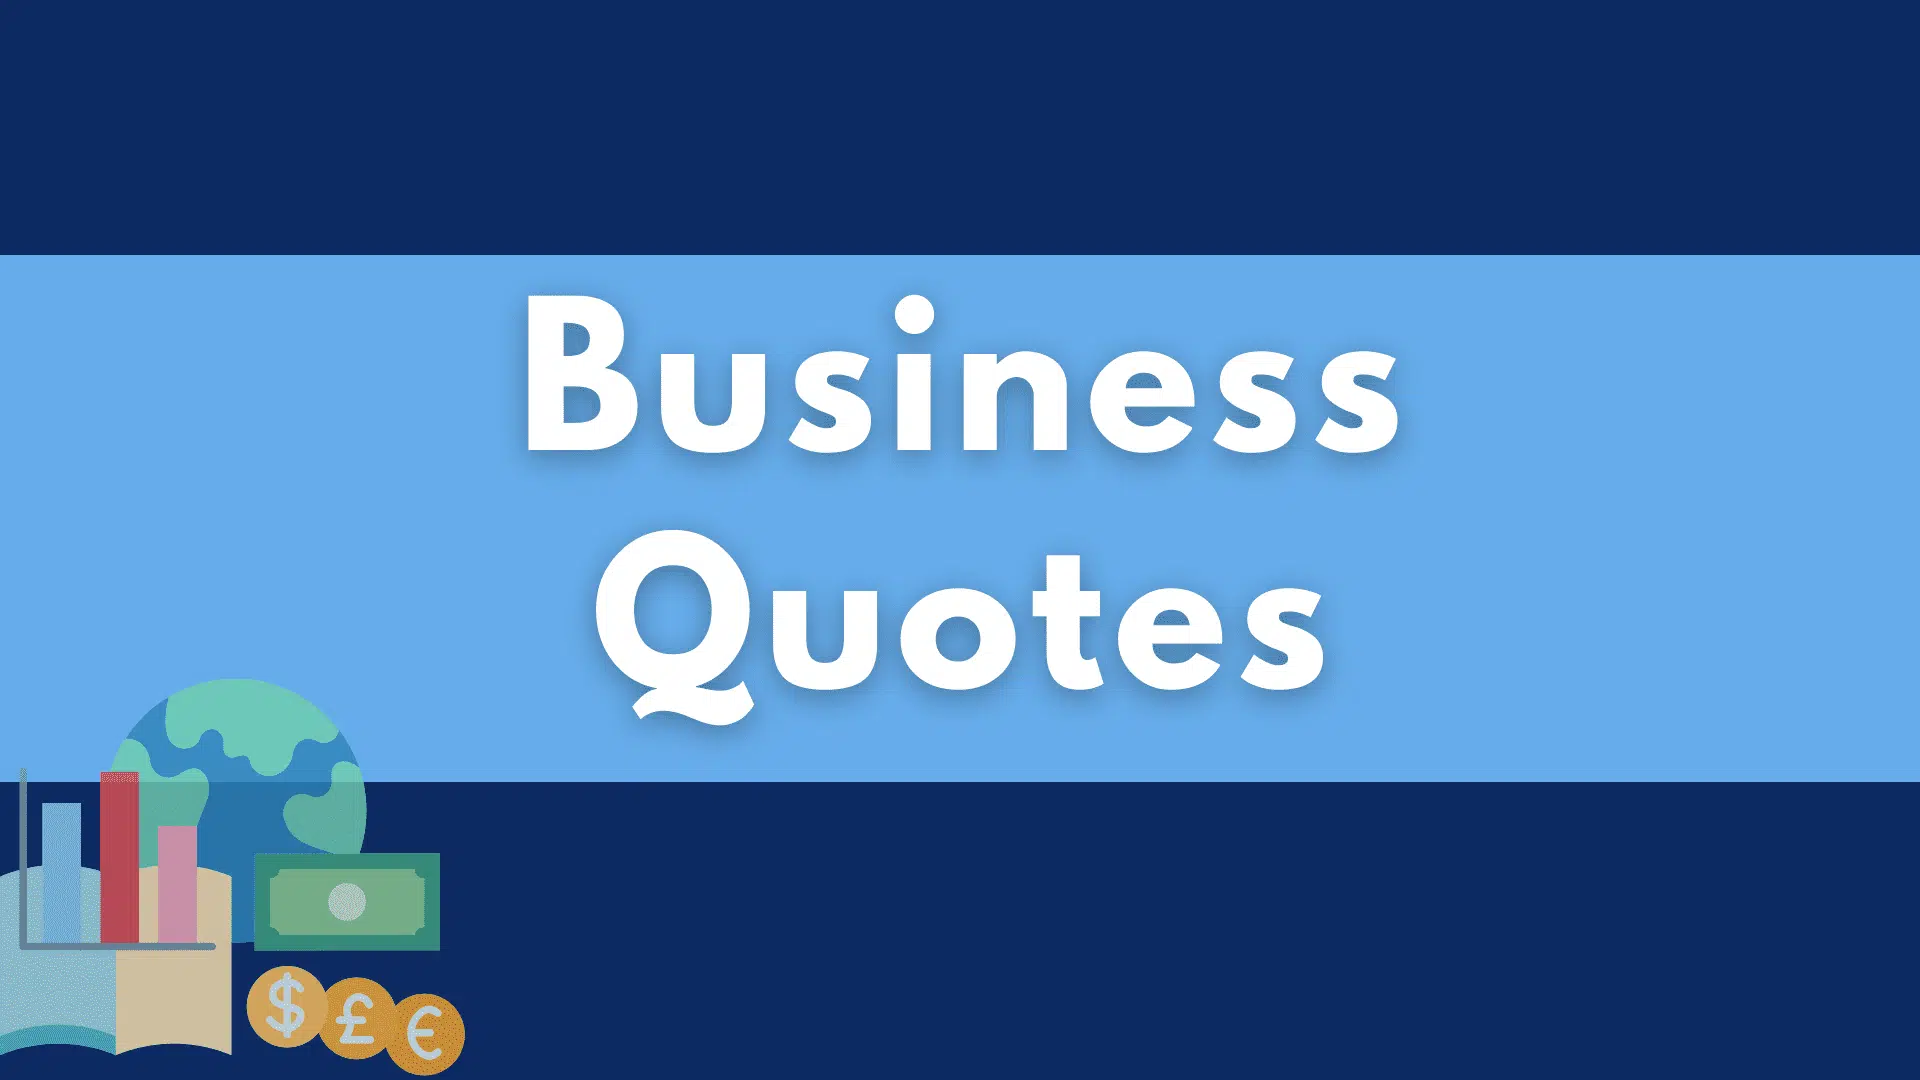 37 Best Business Quotes to Inspire Entrepreneurs & Team Members | PM ...